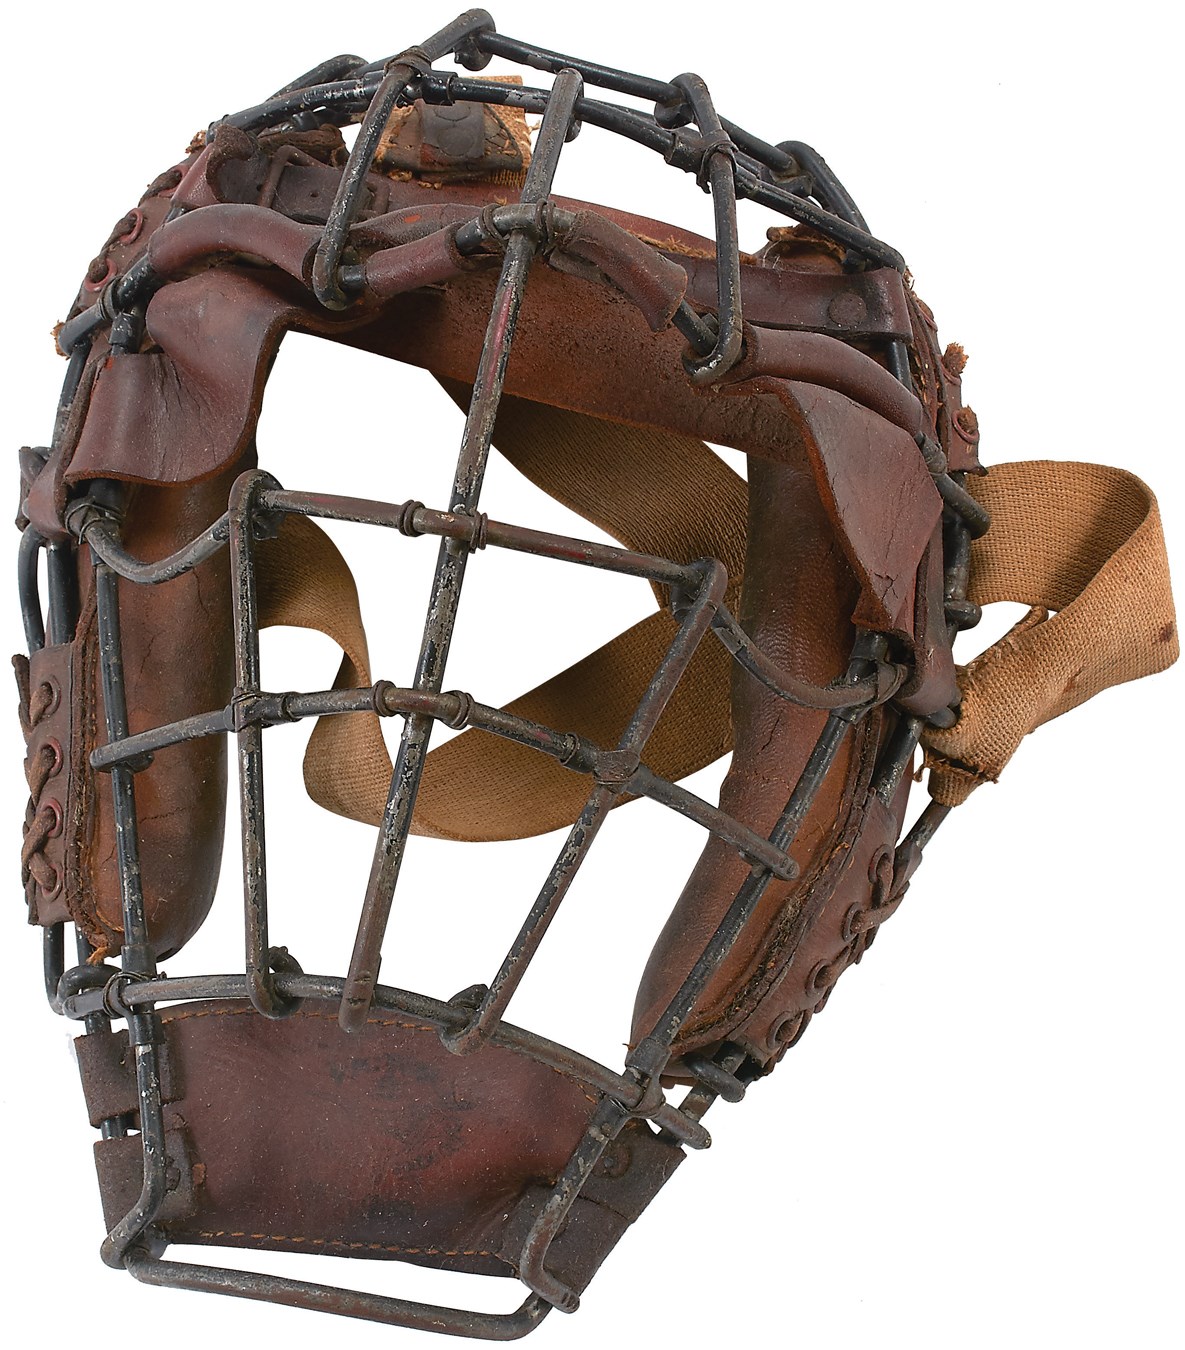 Antique Sporting Goods - Late 19th Century Catcher's Mask with Sun Visor